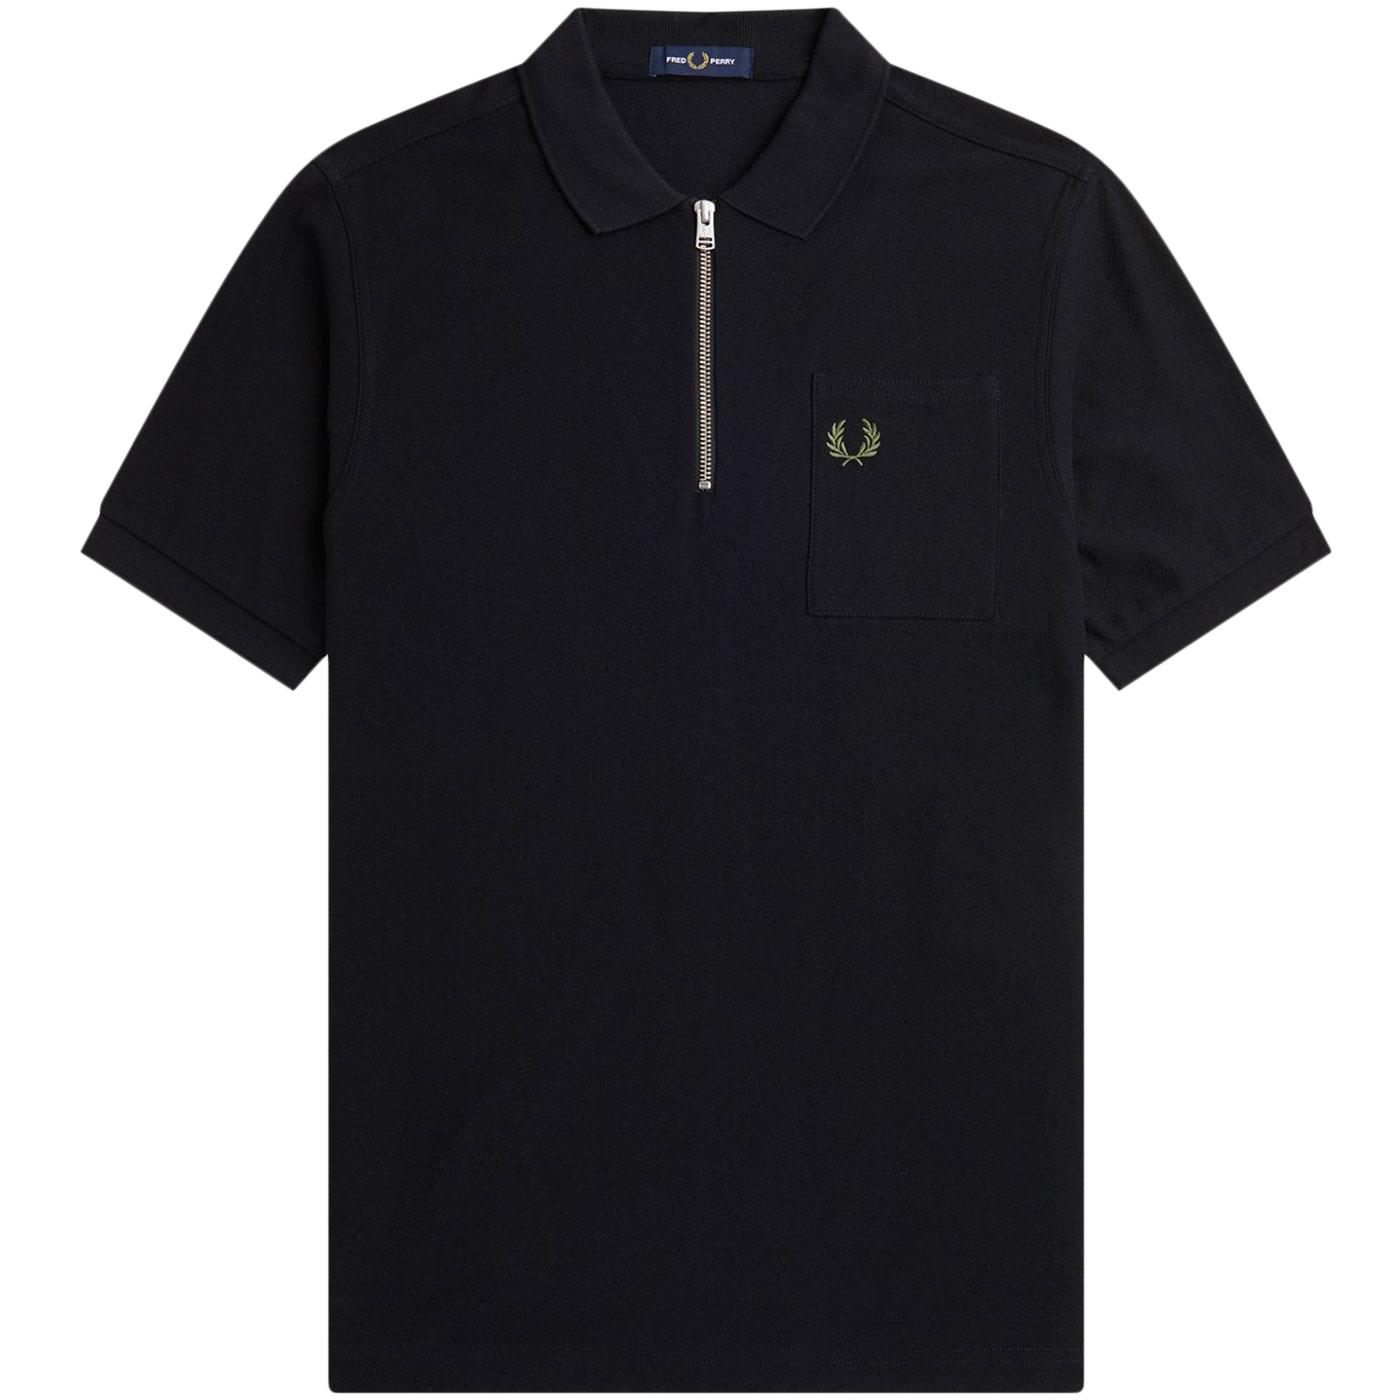 Fred Perry Crepe Cotton Jacquard Zip Neck Polo B